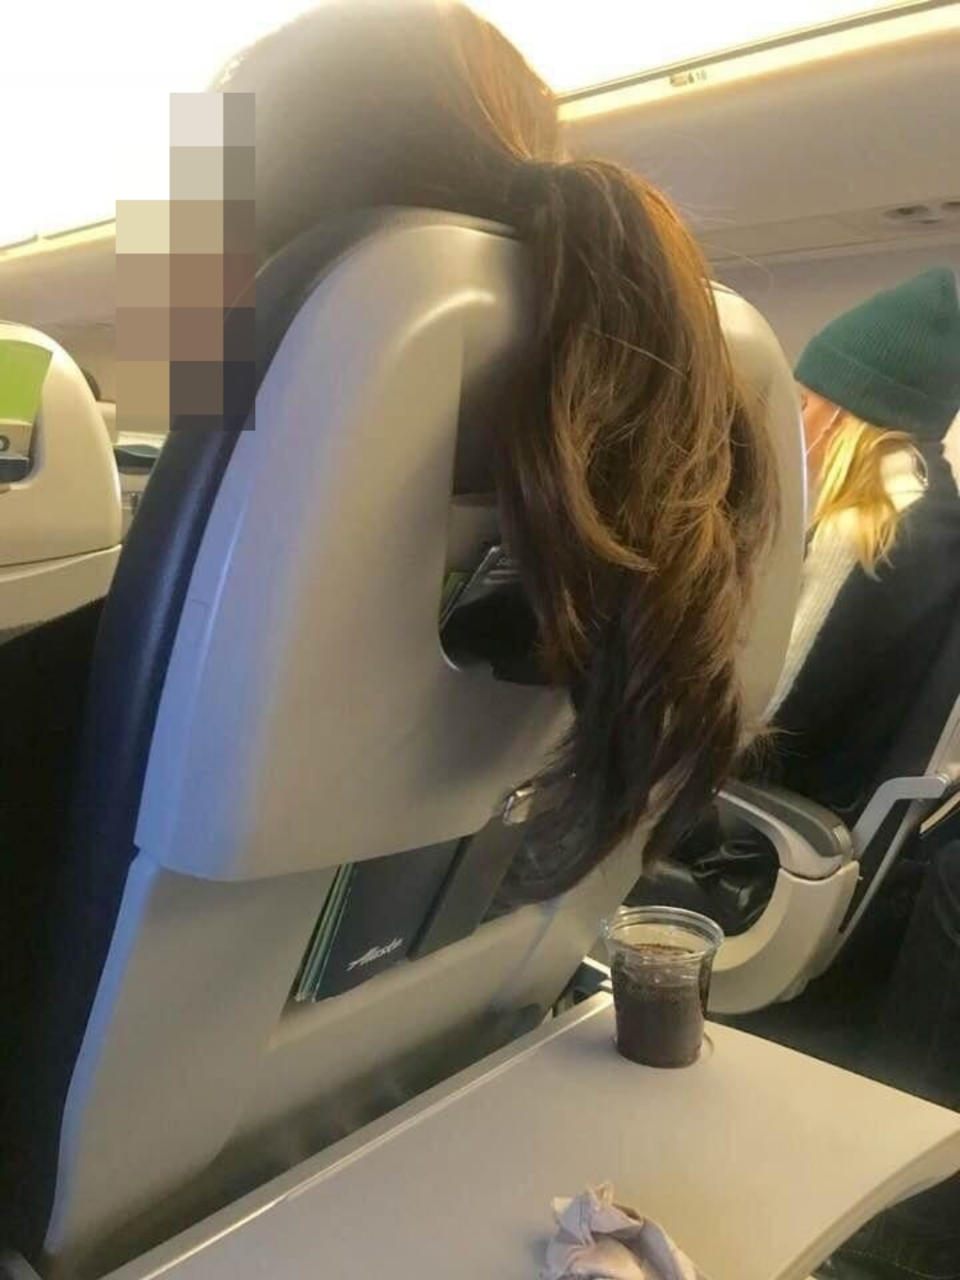 Someone's hair hanging over their seat